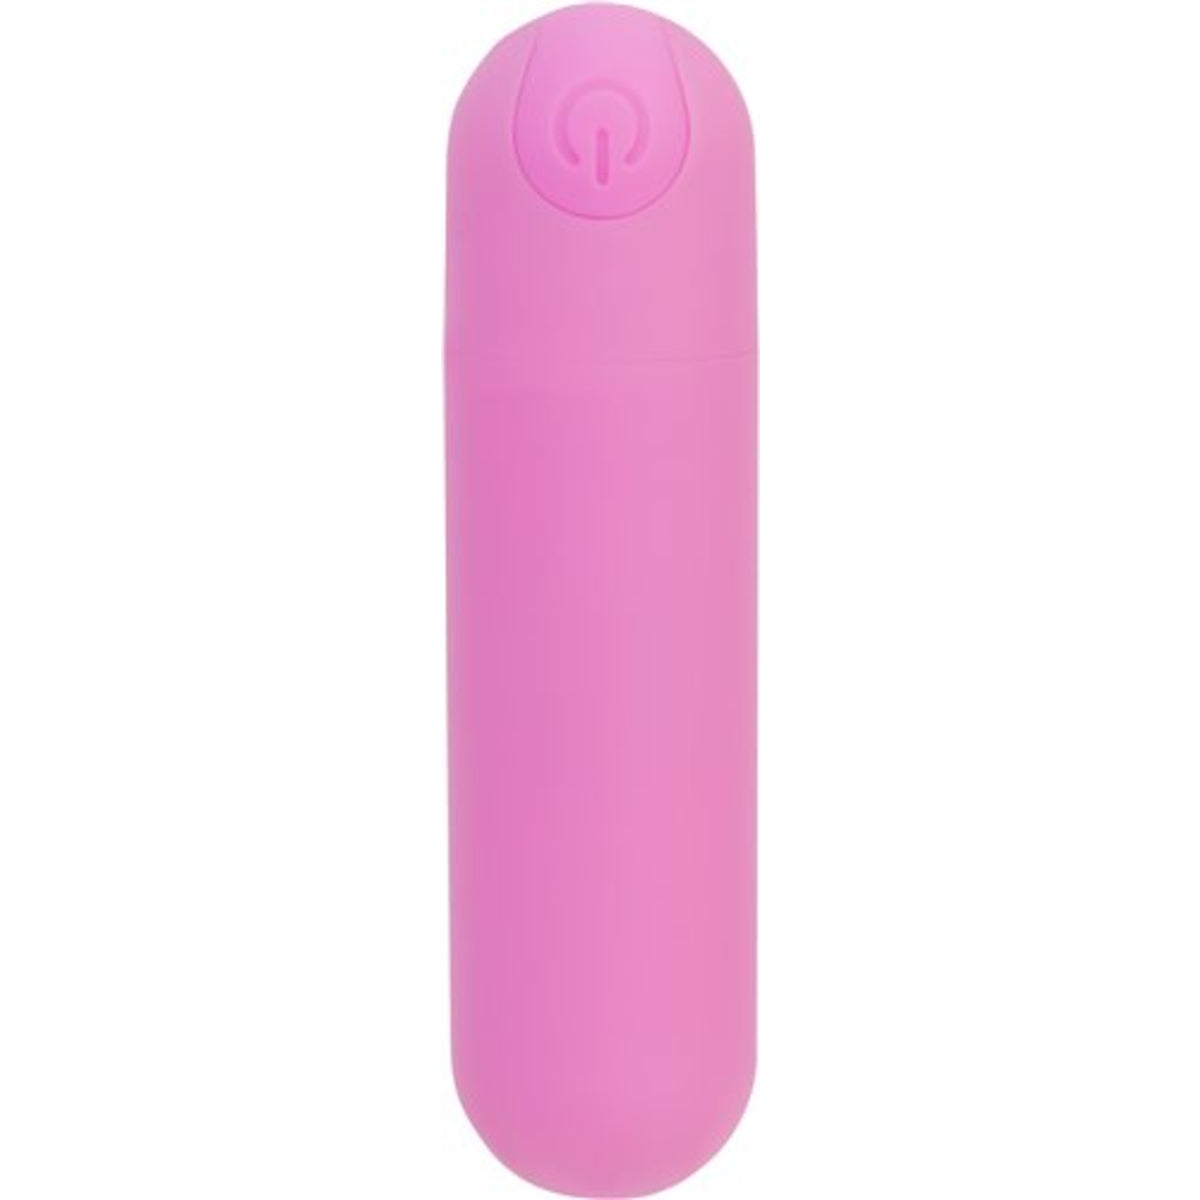 The BMS Power Bullet is one of our staple vibes! Packs a punch for it's size. 9 different functions. A great starter toy!